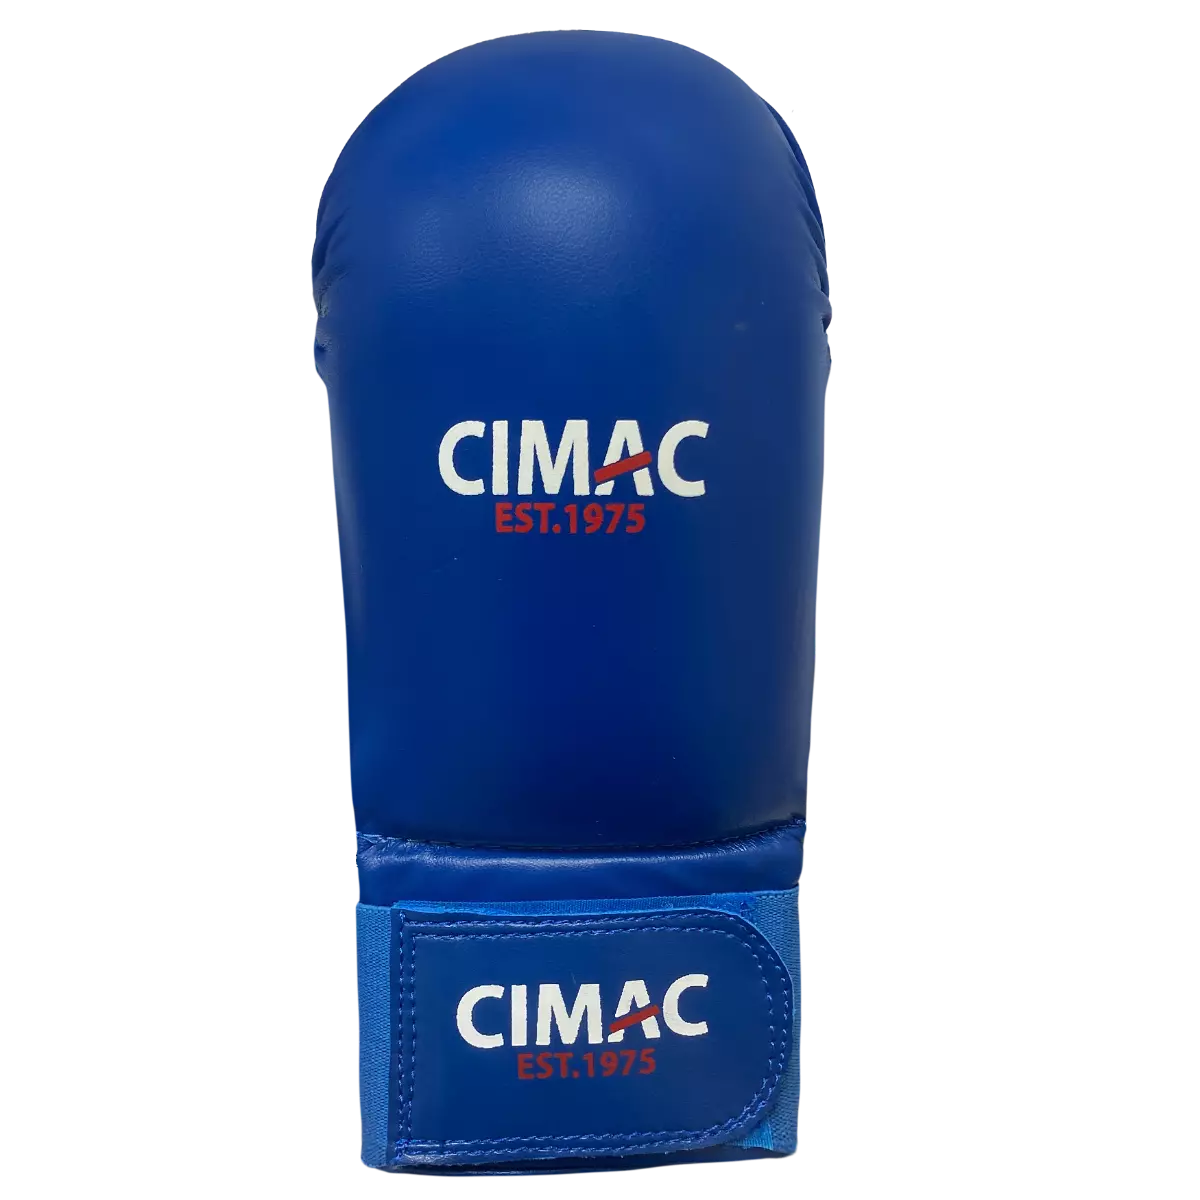 Cimac Competition Karate Mitts Gloves With Thumb